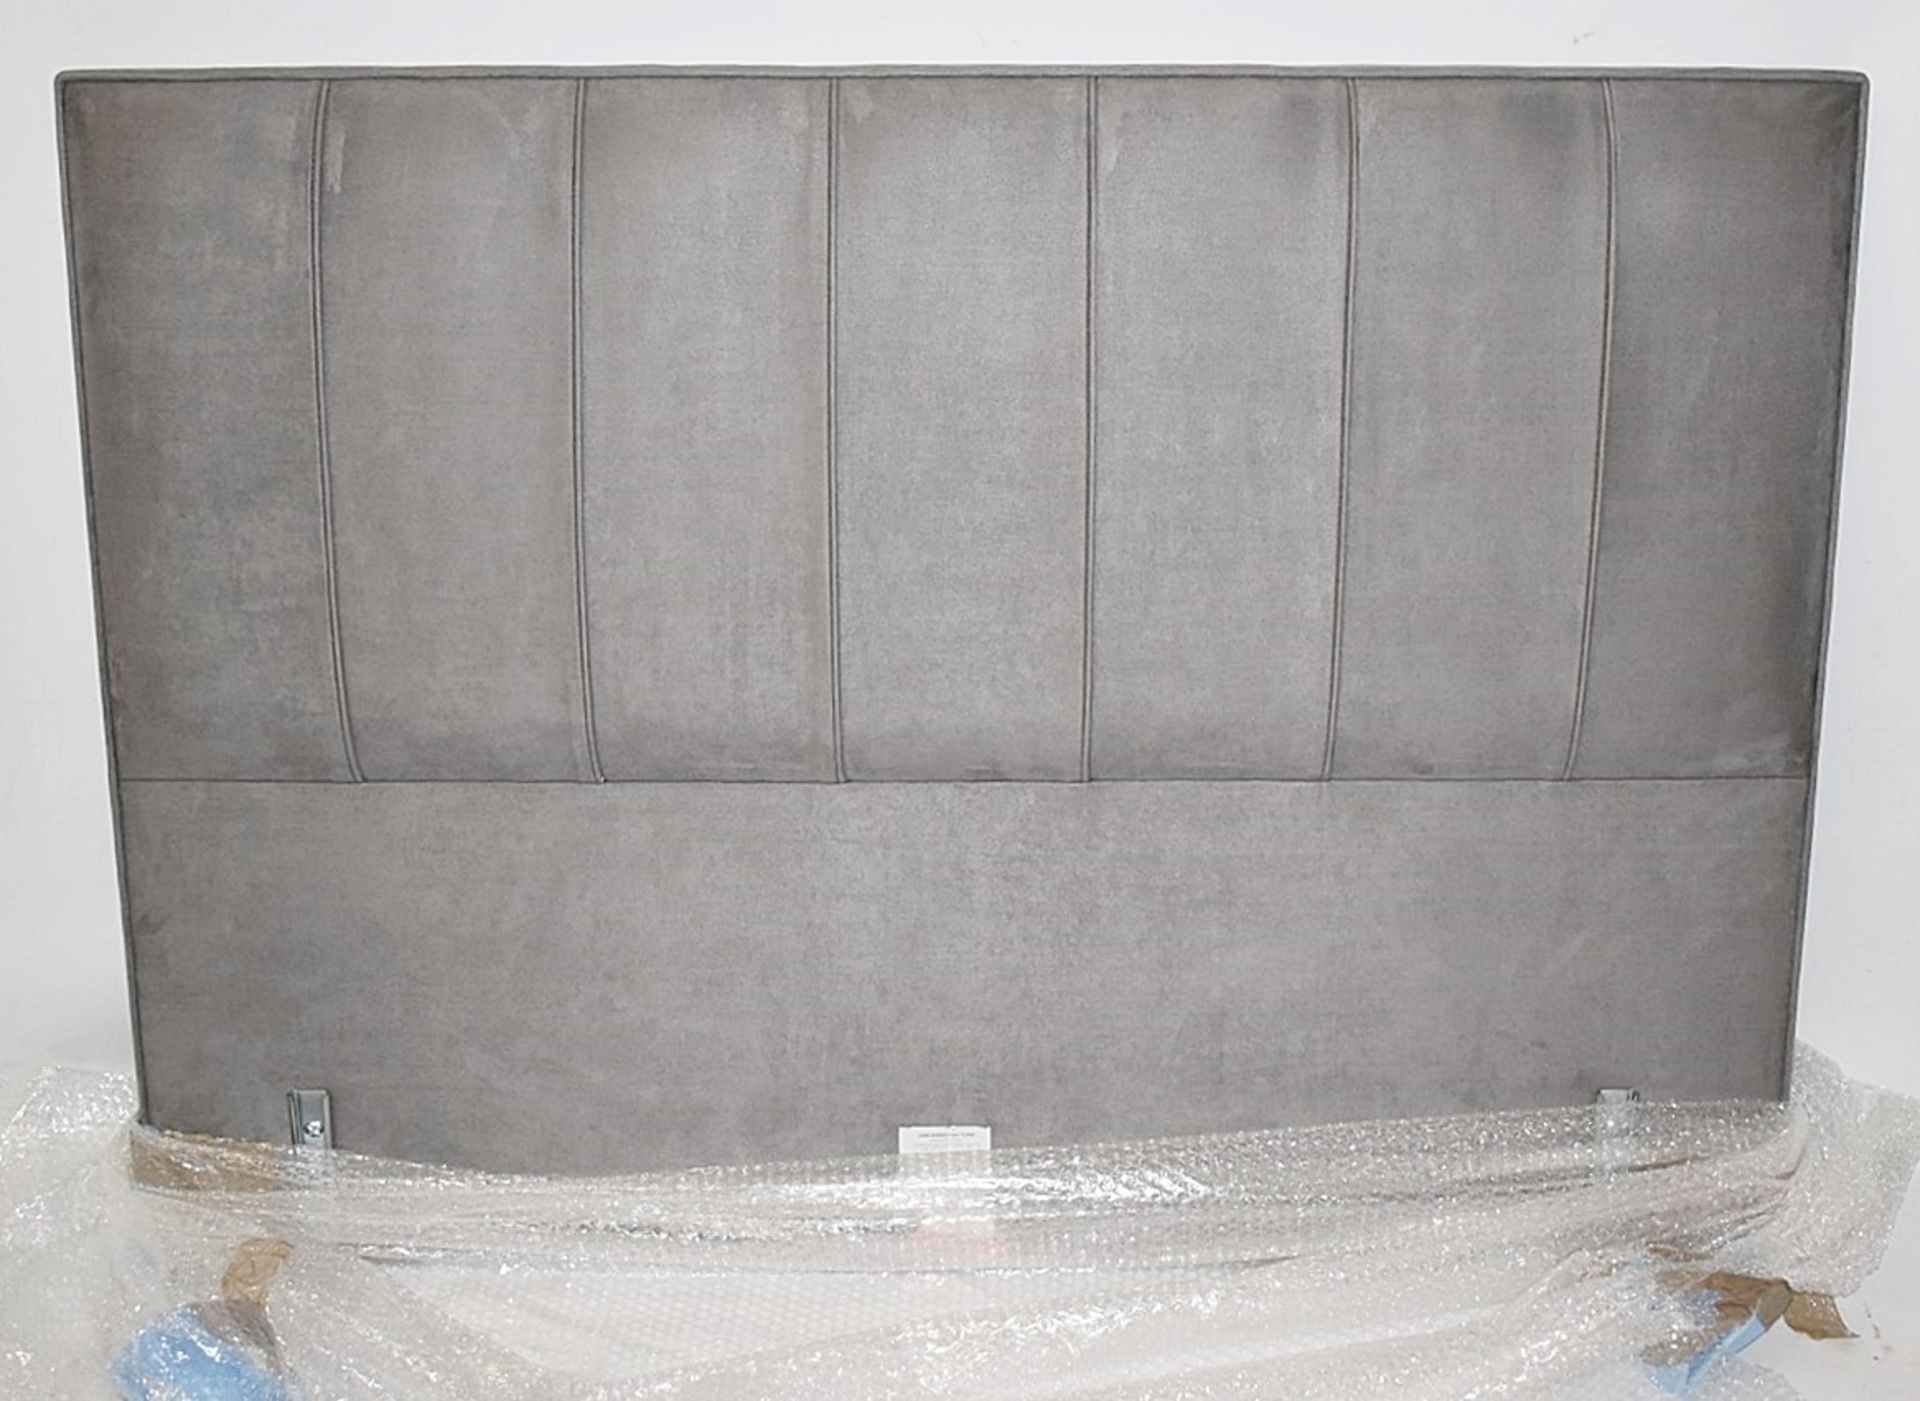 1 x VISPRING 'Hera' Luxury Handcrafted Double Headboard In A Grey Faux Suede - British Made - Image 4 of 6